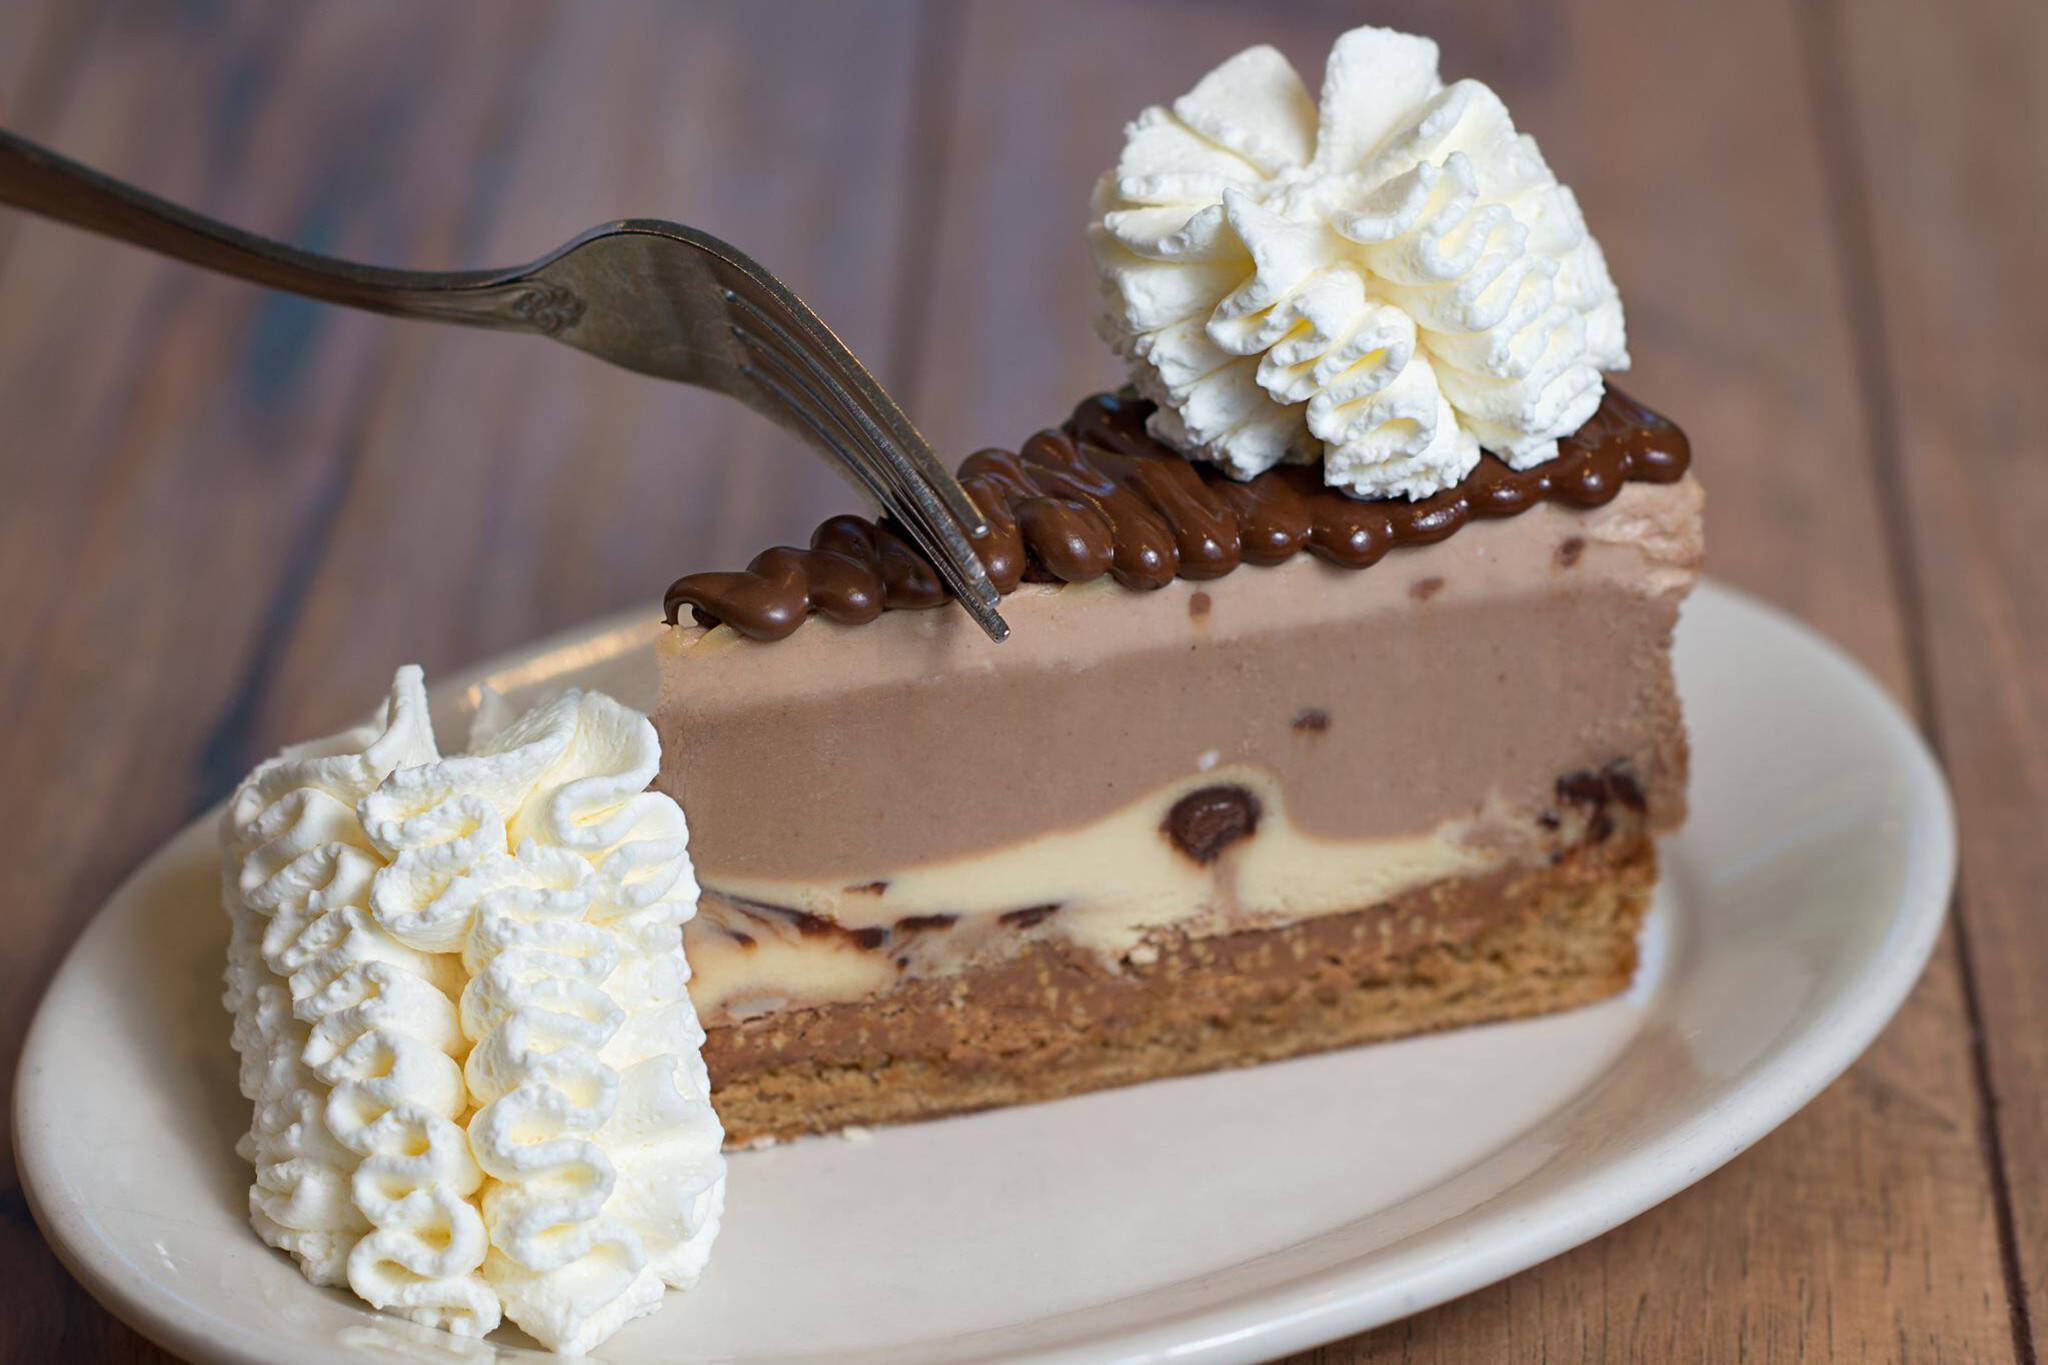 The Cheesecake Factory just announced its opening date in Toronto